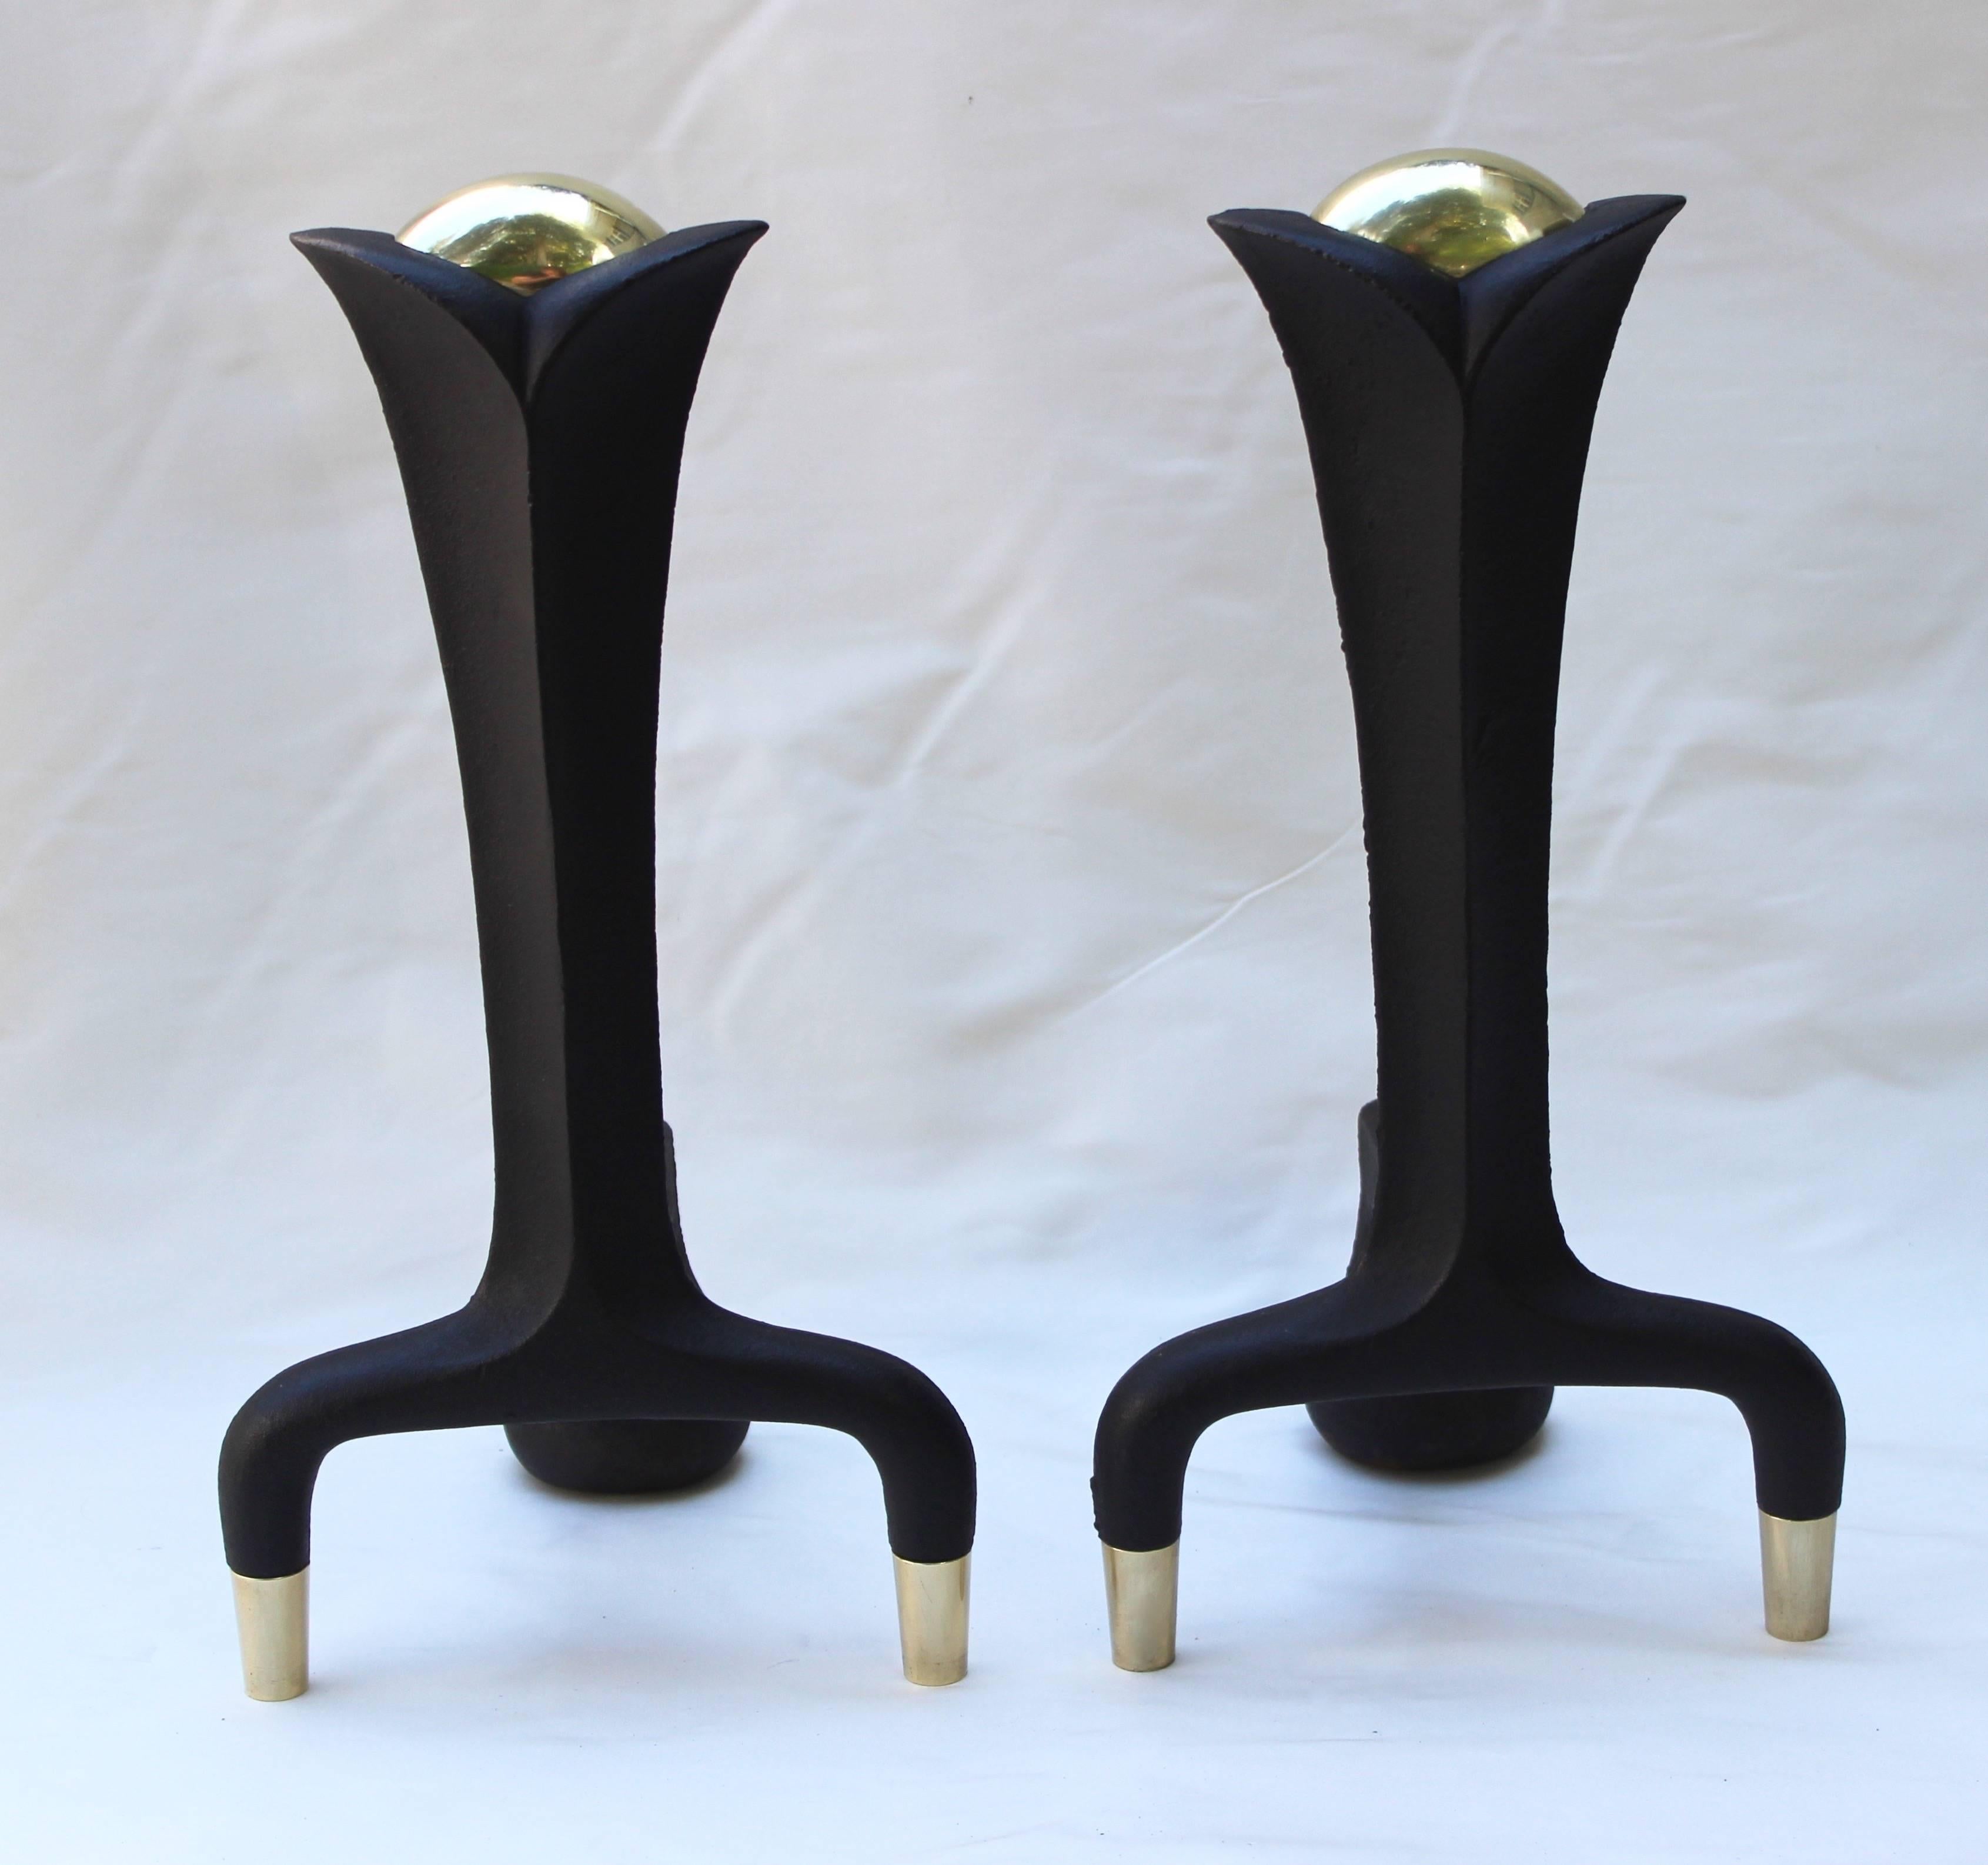 Pair of Donald Deskey Andirons In Excellent Condition For Sale In East Hampton, NY